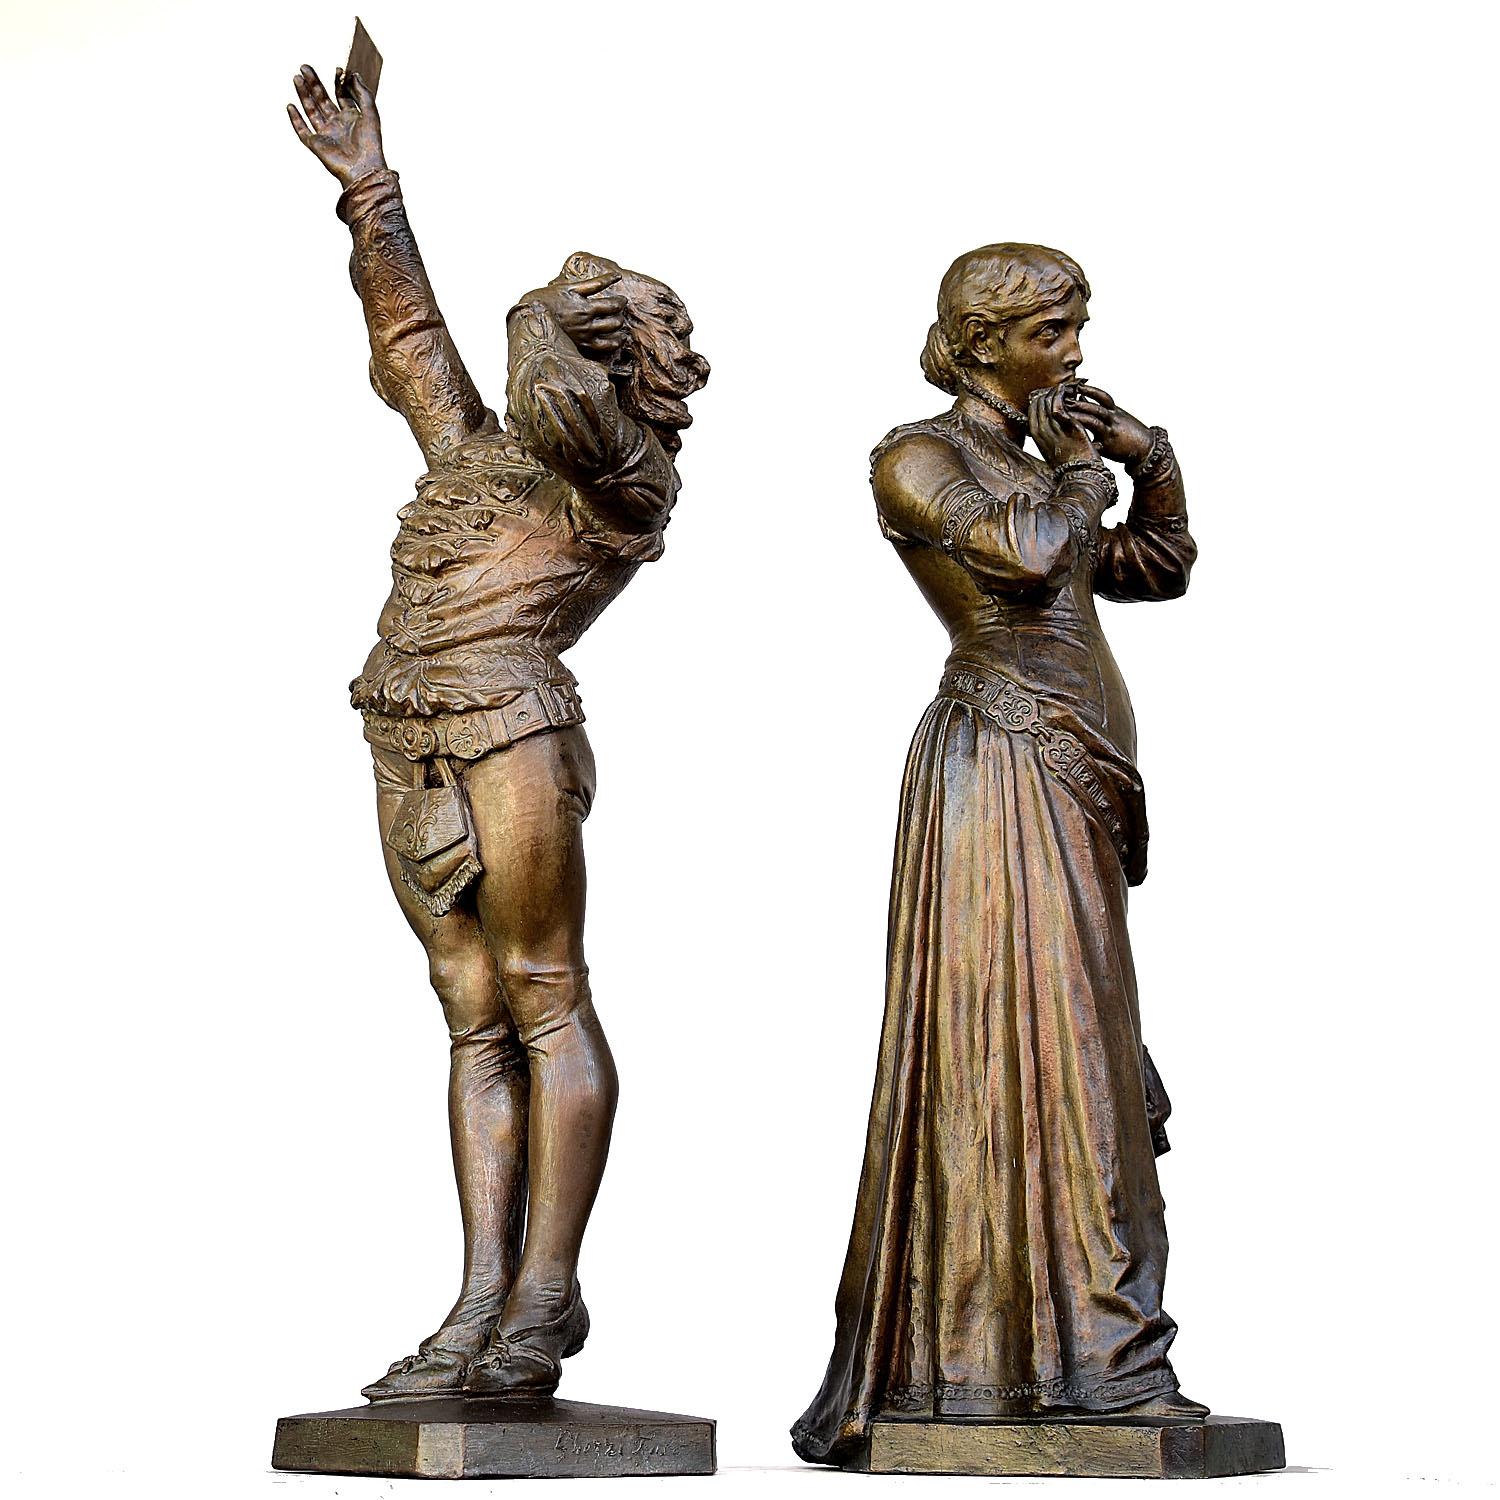 Pair of bronze statues representing the most famous and romantic lovers of Verona: Romeo and Juliet. Period 19th century by Angelo Cuglierero (1850-1903) Turinese sculptor dated 1882. Height of 110 cm for Romeo and 93 cm for Juliette.